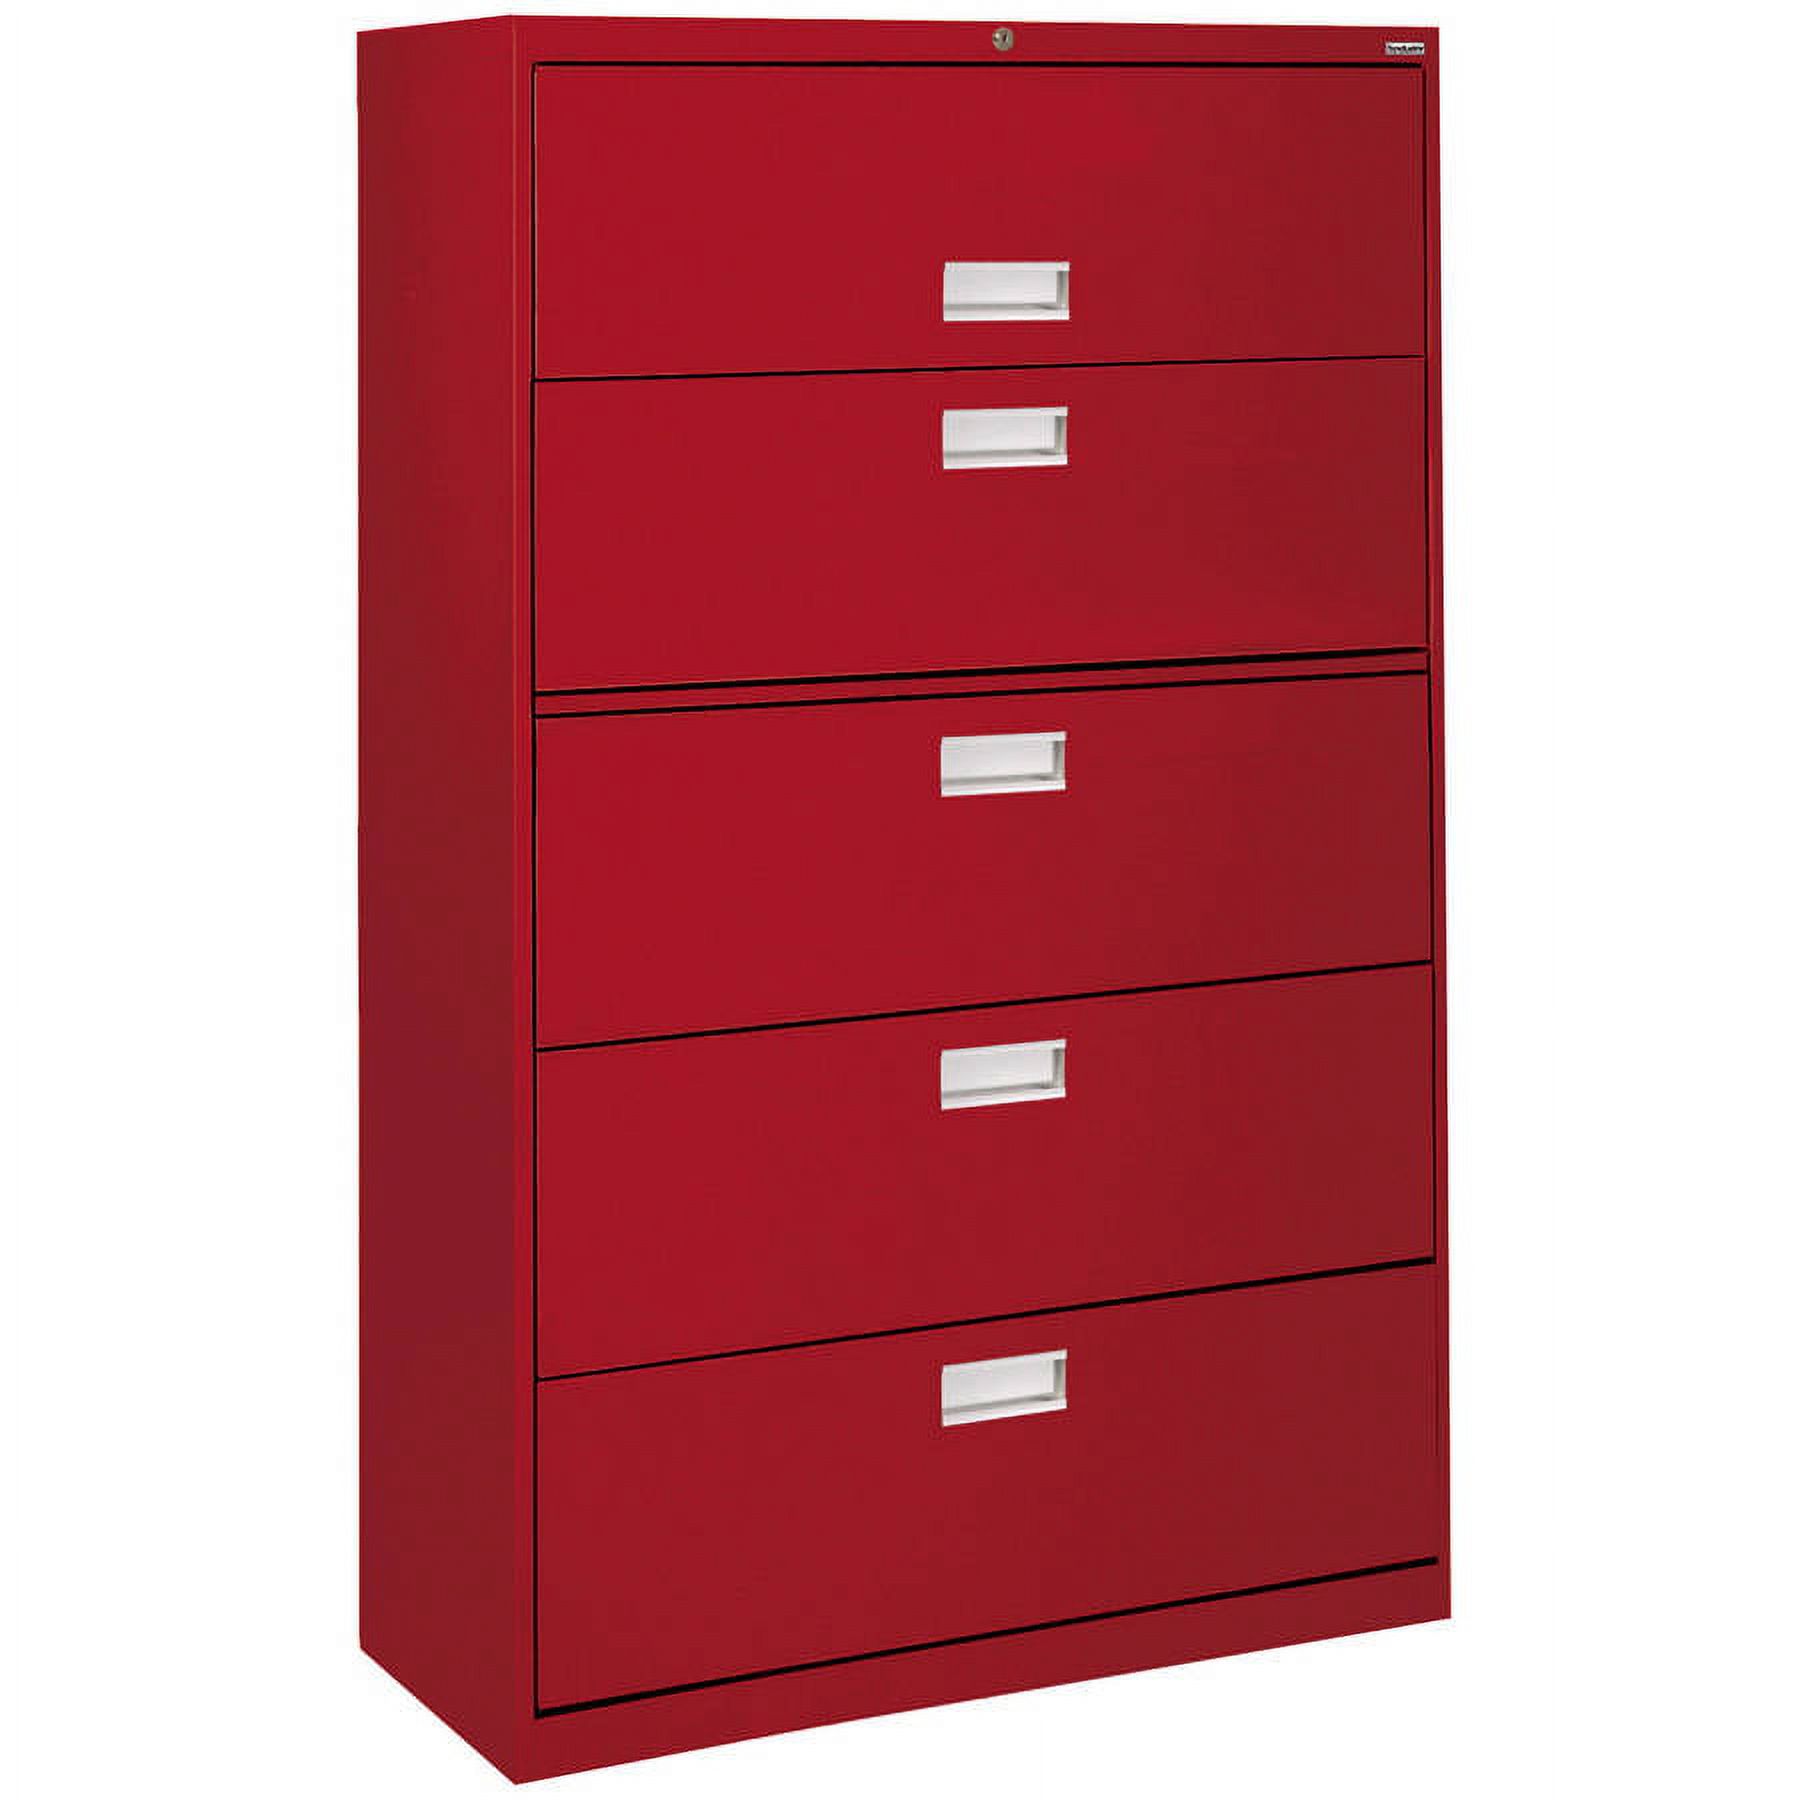 Sandusky Lee 600 Series 36" 5-Drawer Lateral File, Red - image 1 of 1